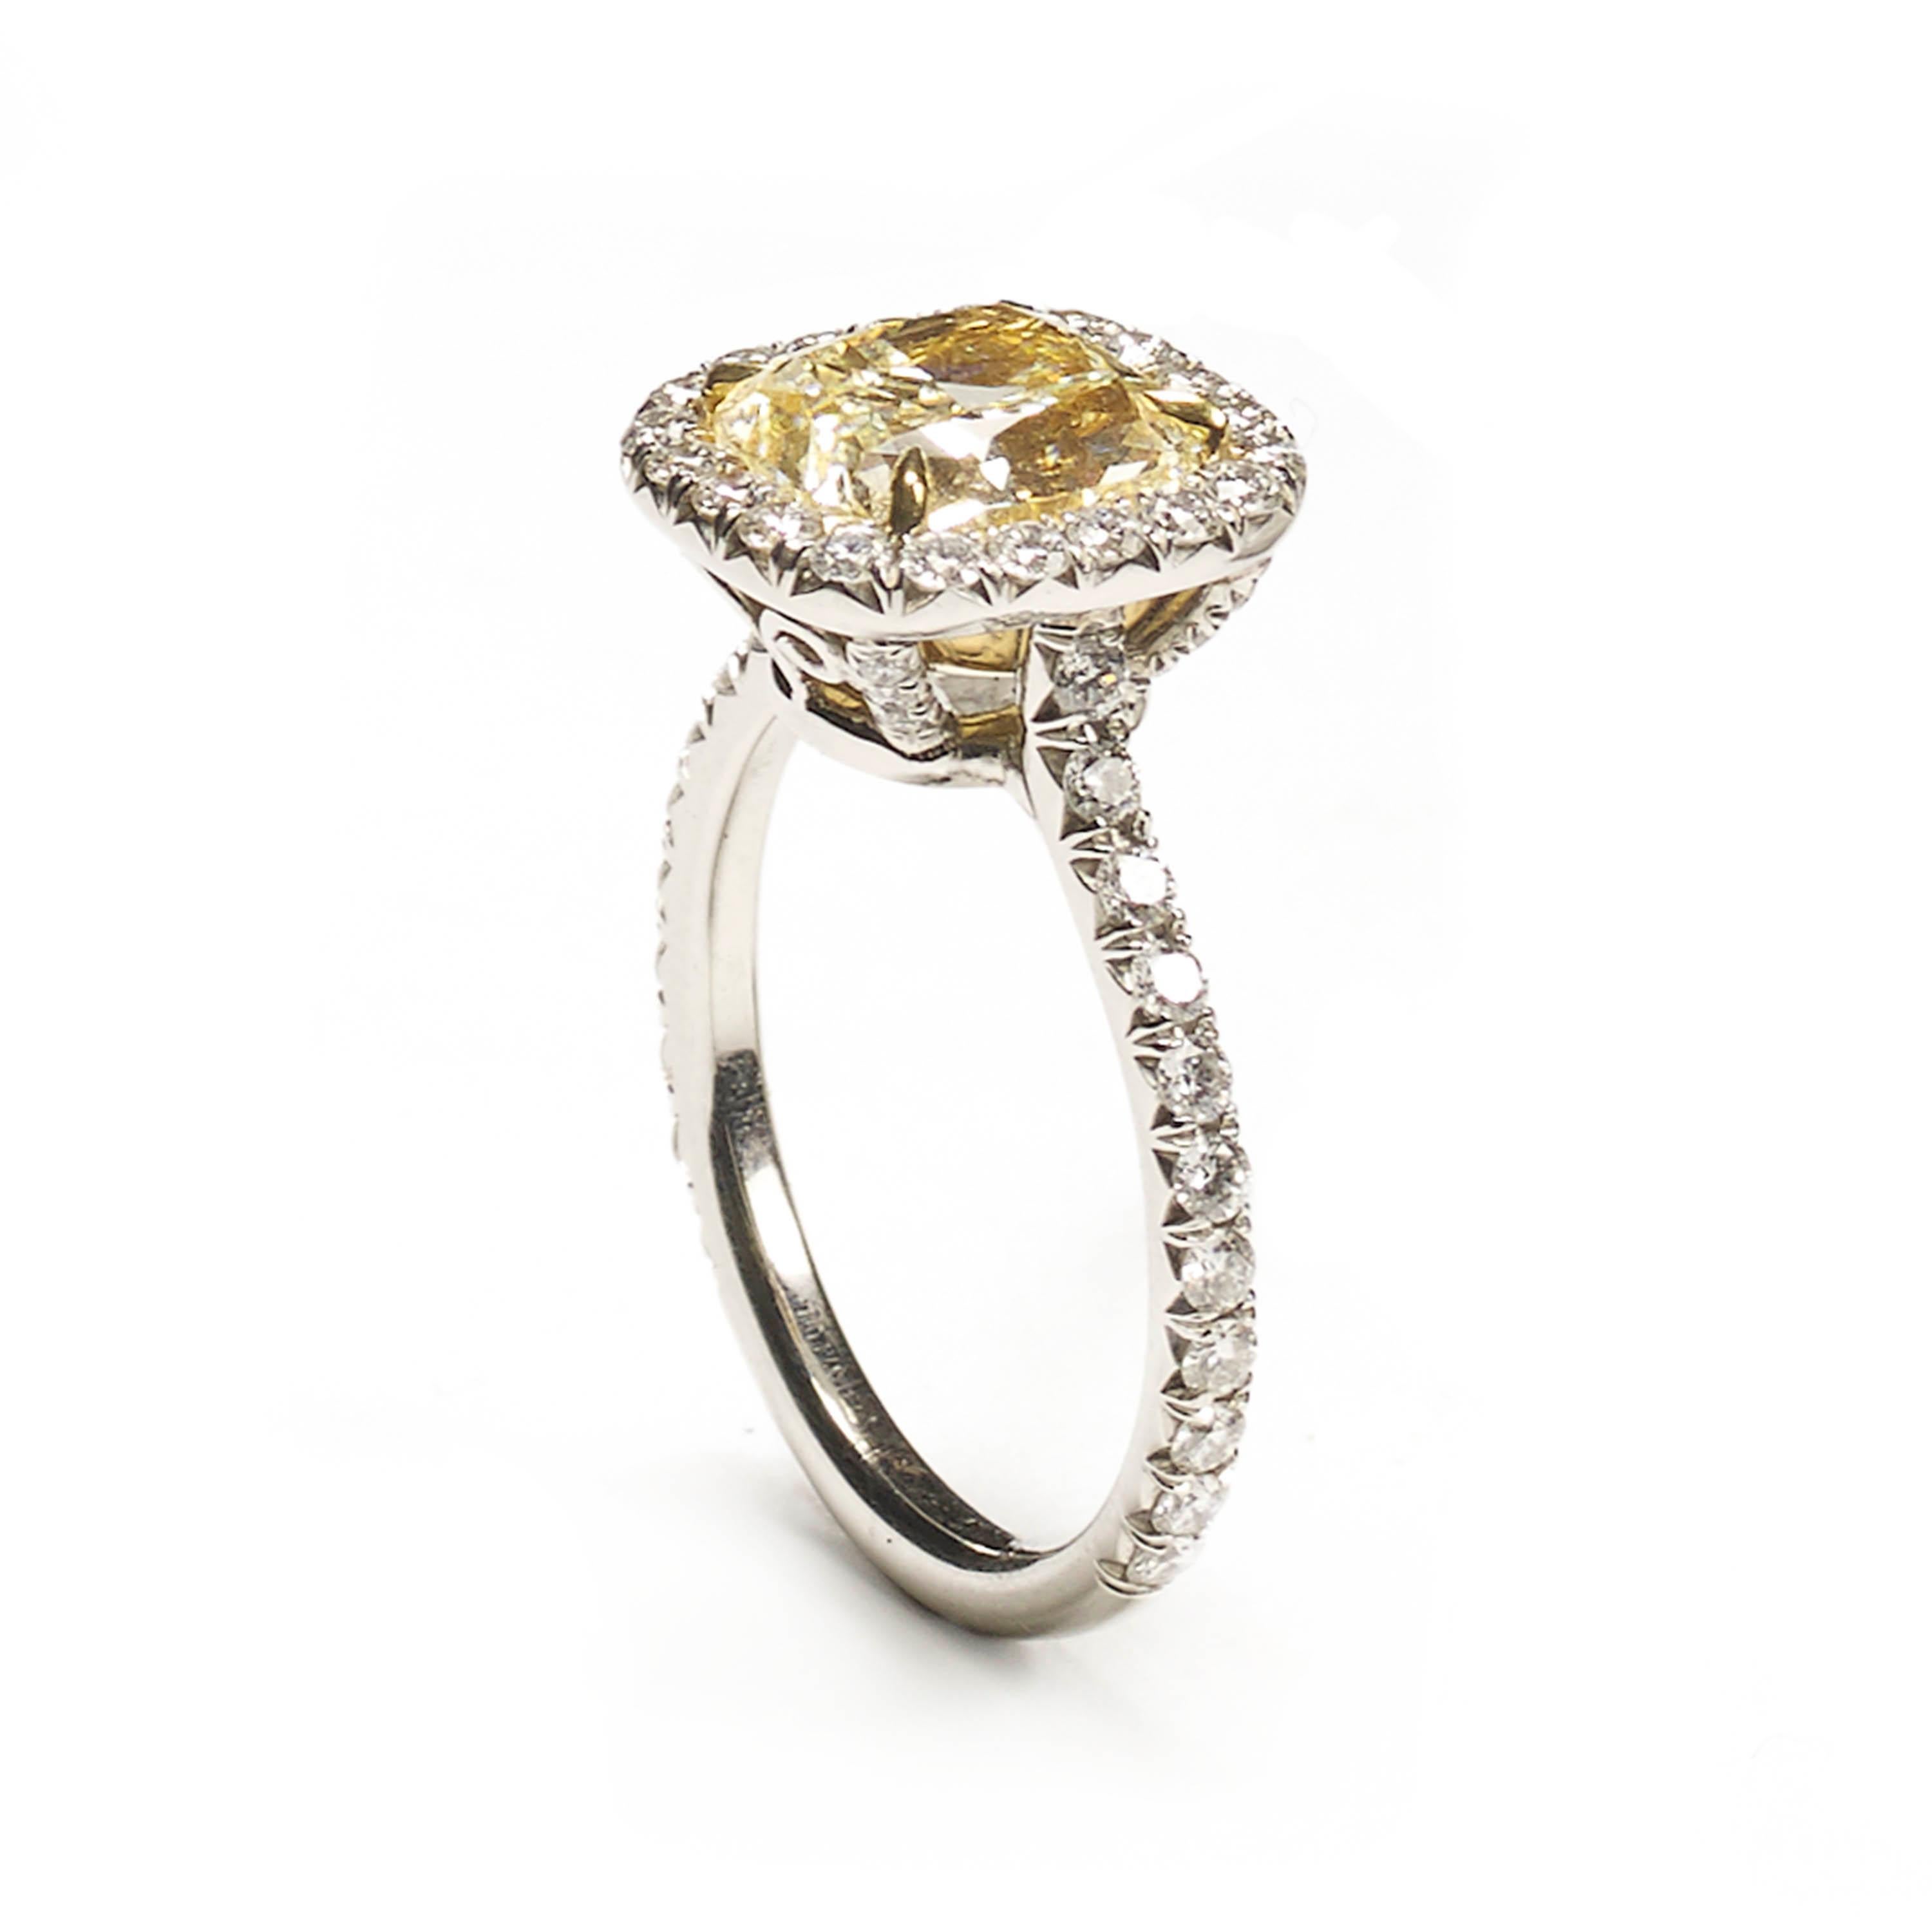 A modern micro pavé yellow diamond ring, set with an approximately 3.00ct cushion-cut light yellow diamond, in a yellow gold, four claw setting, with a micro pavé set surround, shoulders and bezel, with 54 round brilliant-cut diamonds, with a total